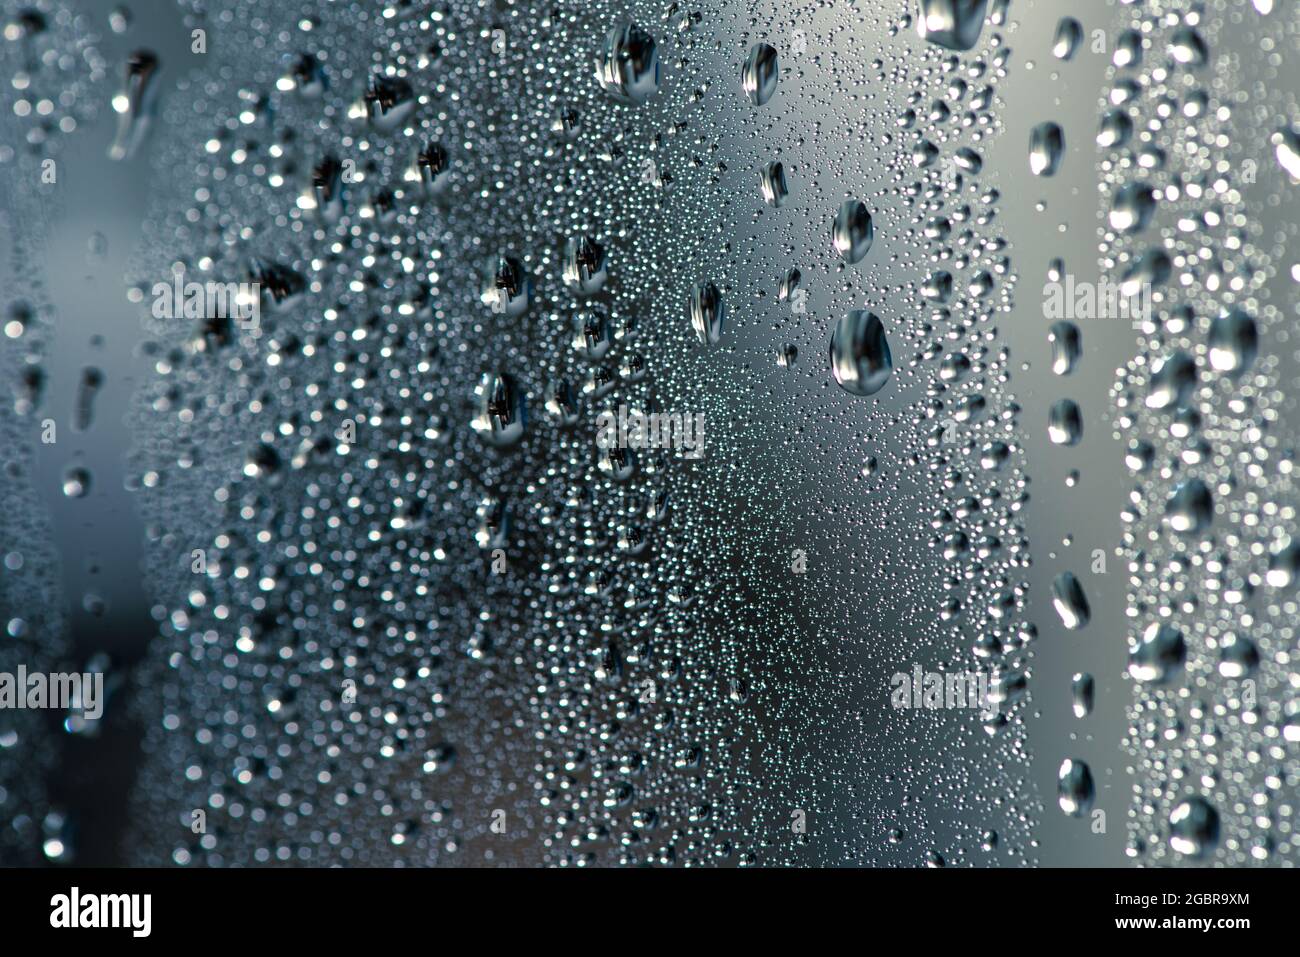 Natural water drops on glass. Stock Photo